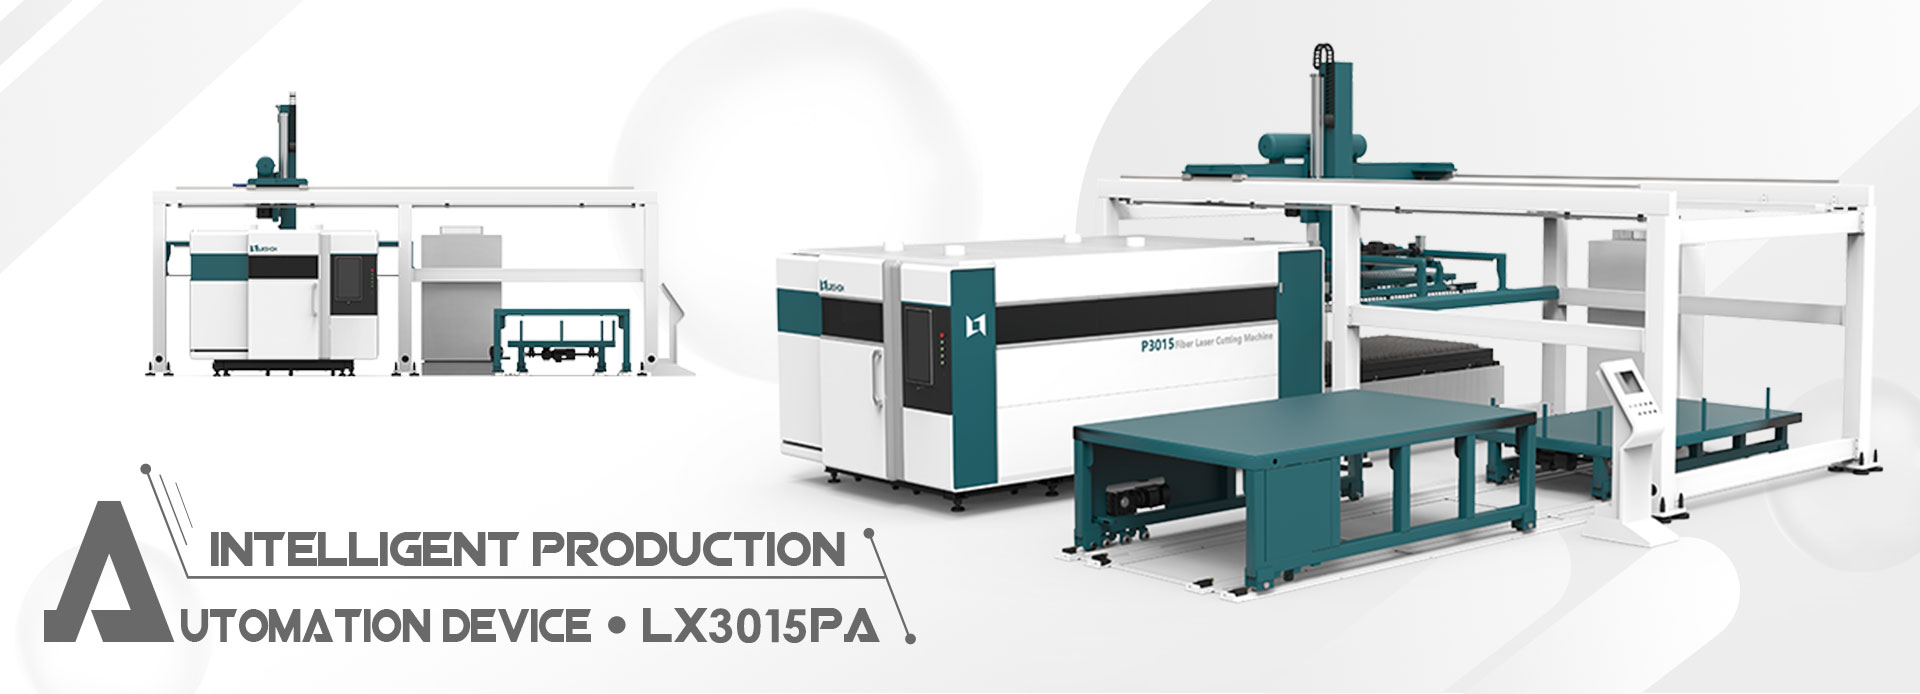 LX3015PA Automation device fiber laser cutter price for sale metal laser machine cut carbon thickness chart aluminum plate for industry